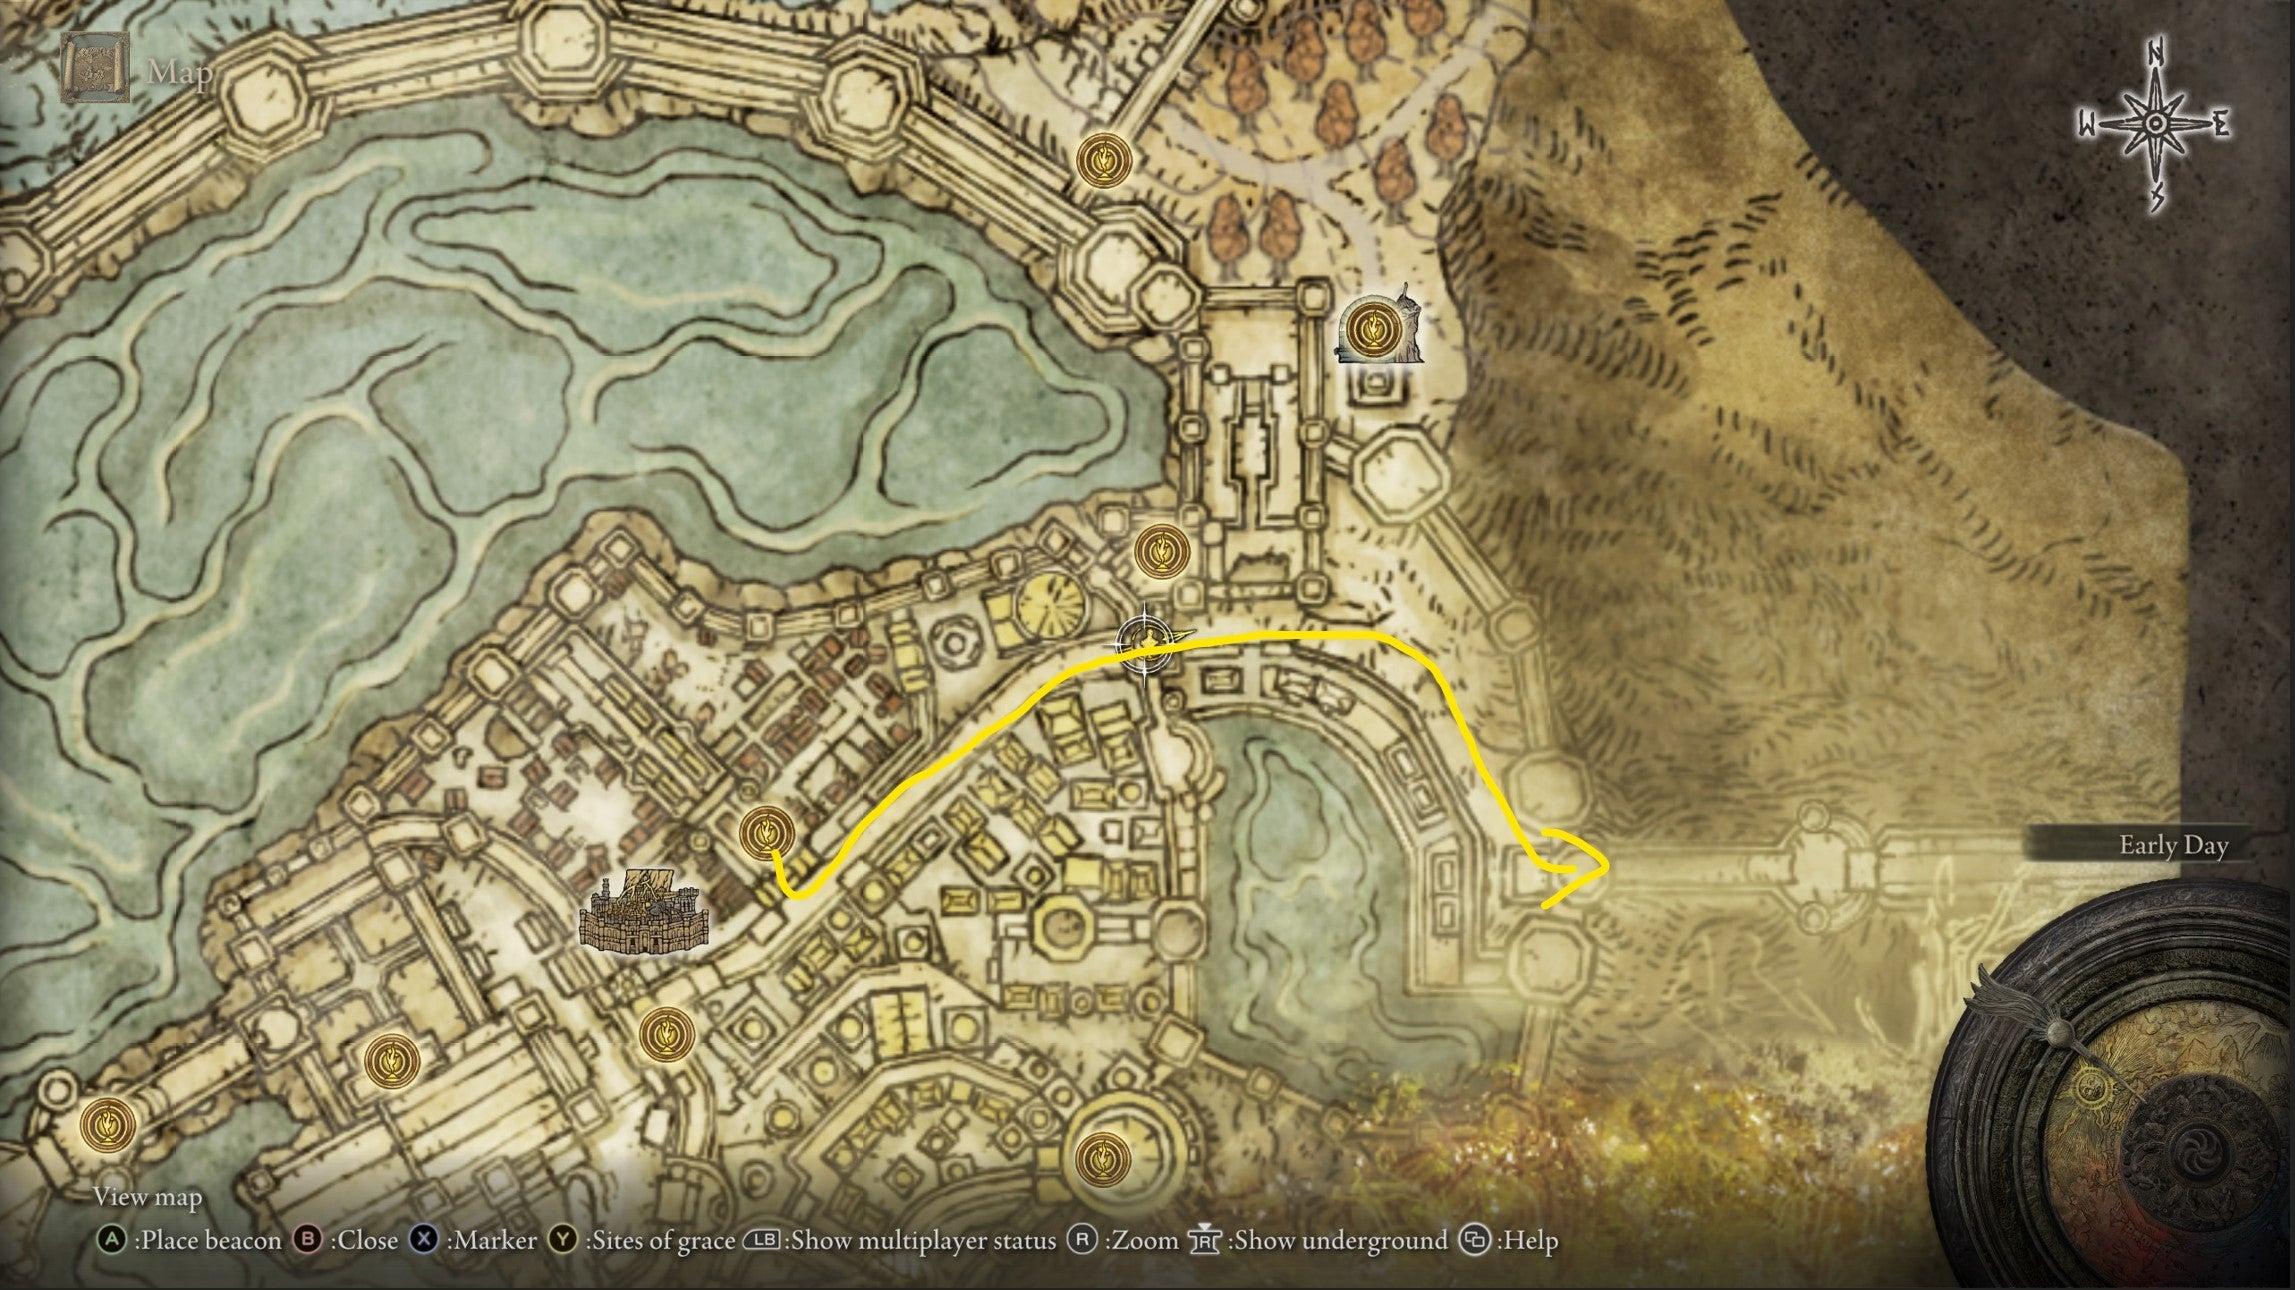 Elden Ring Lift of Rold Location: How to get to Mountaintops of the Giants